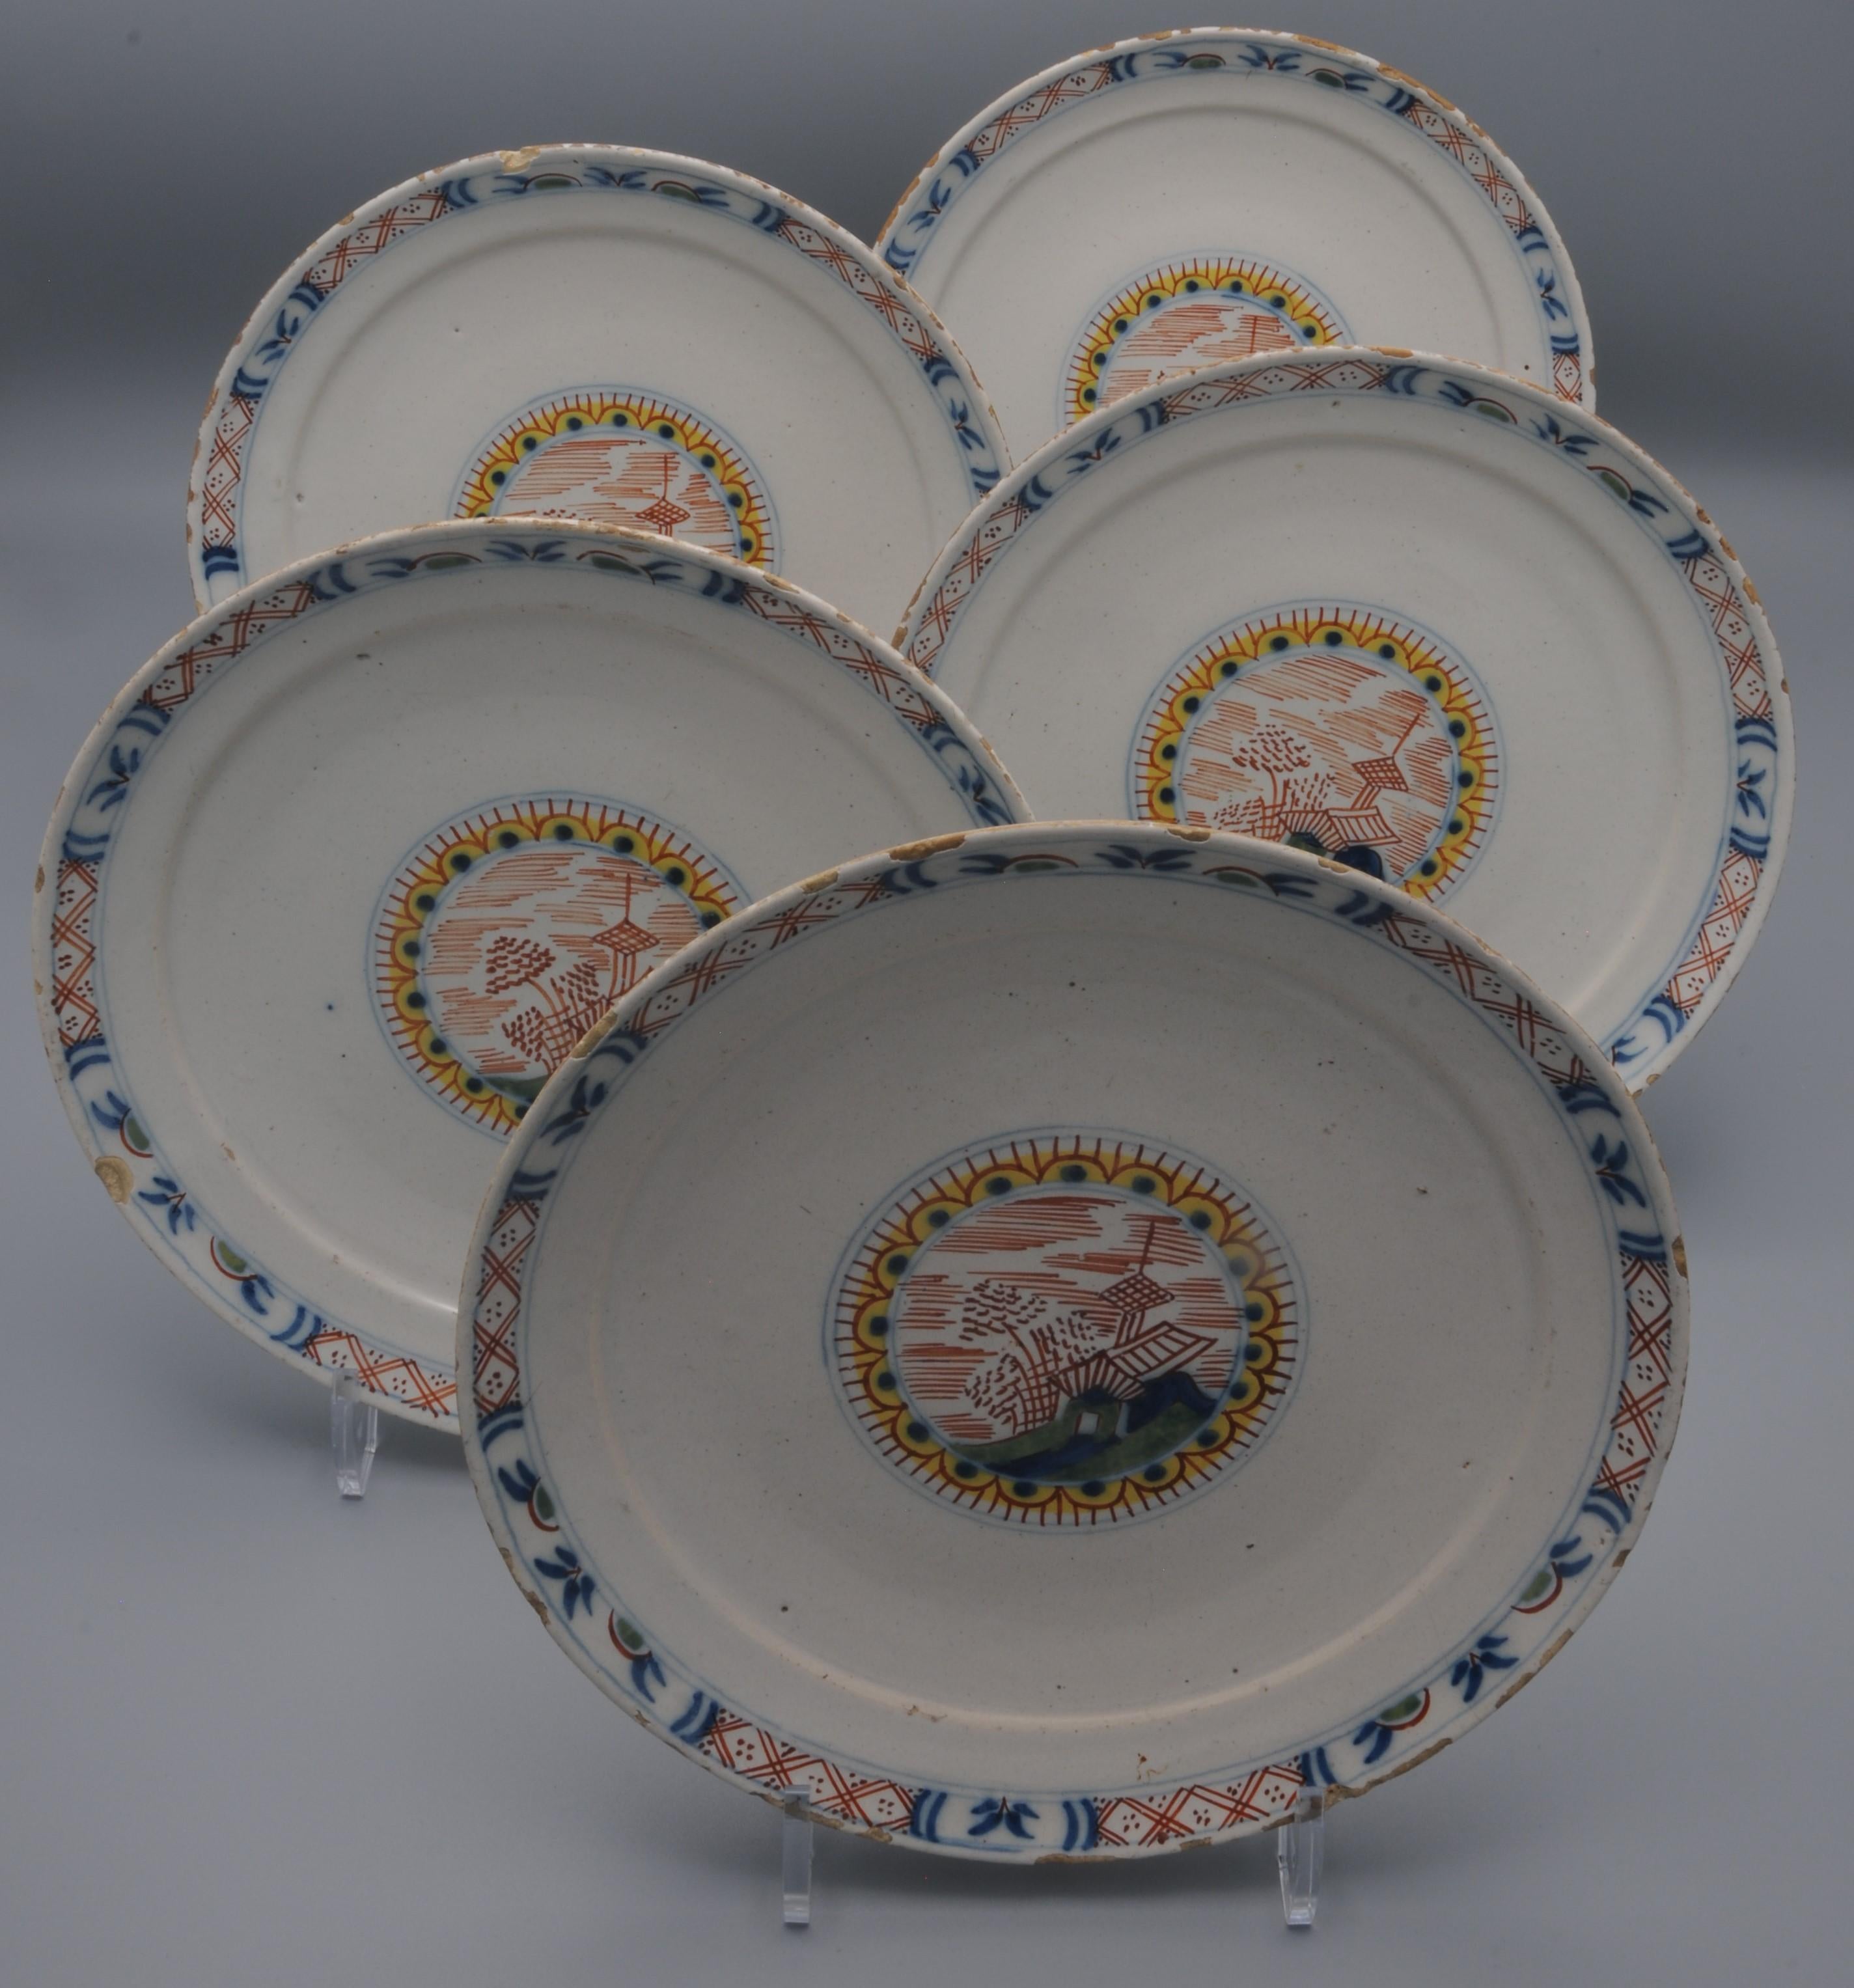 Dutch Delft  - 18th century set of 5 polychrome Chinoiserie Plates For Sale